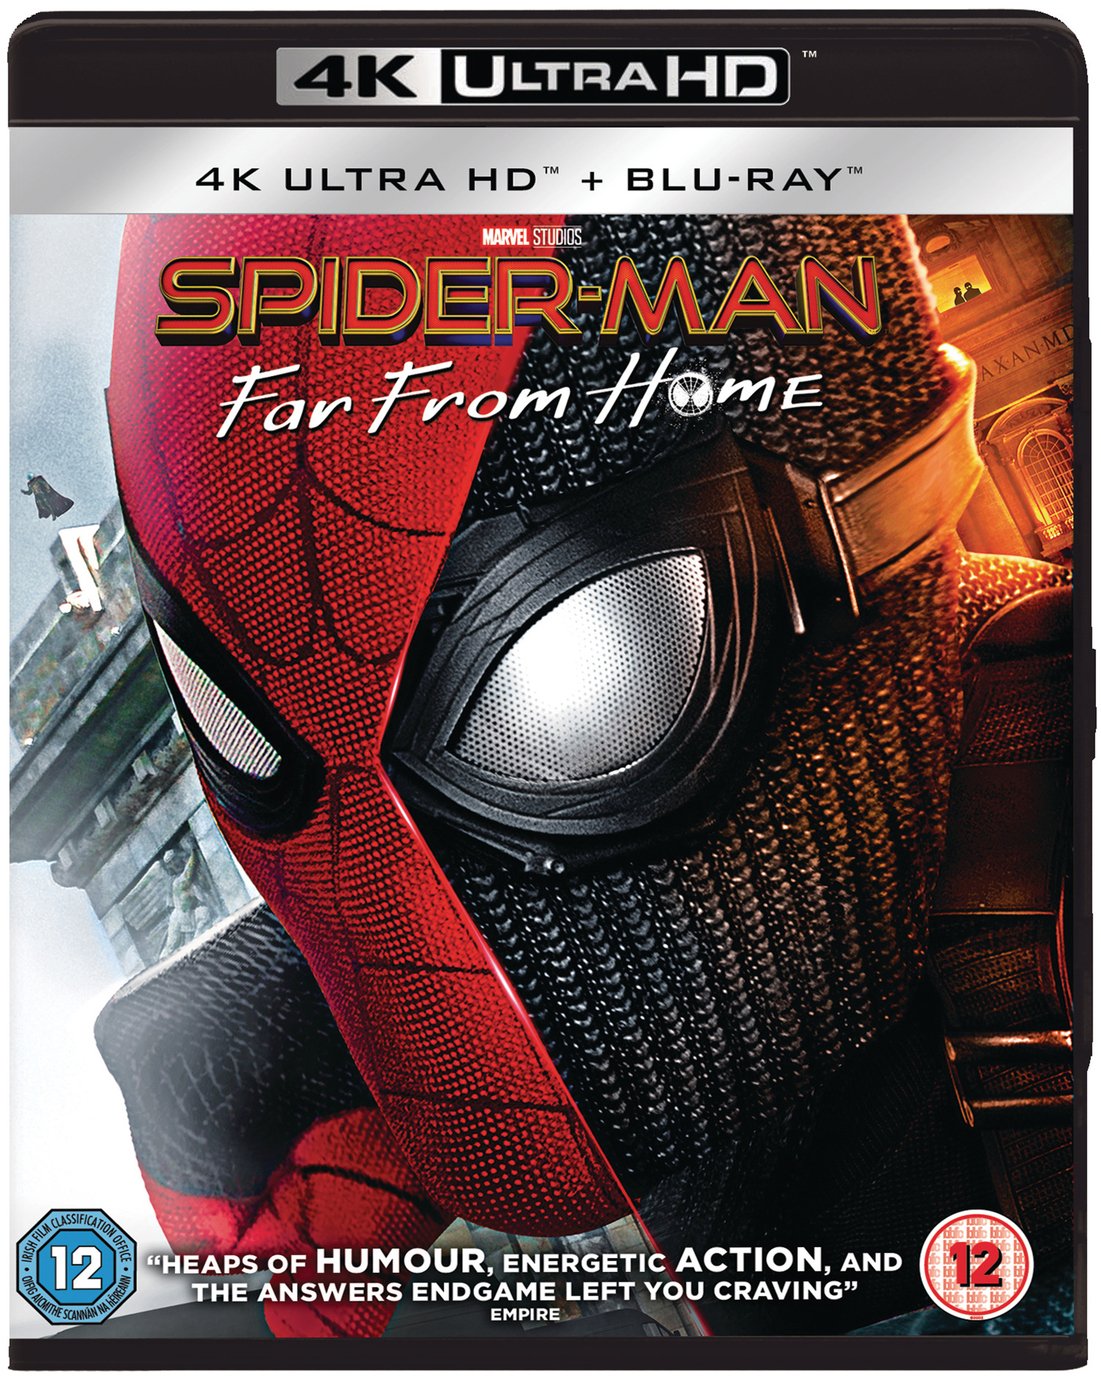 Spider-Man: Far From Home 4K UHD Blu-ray Review